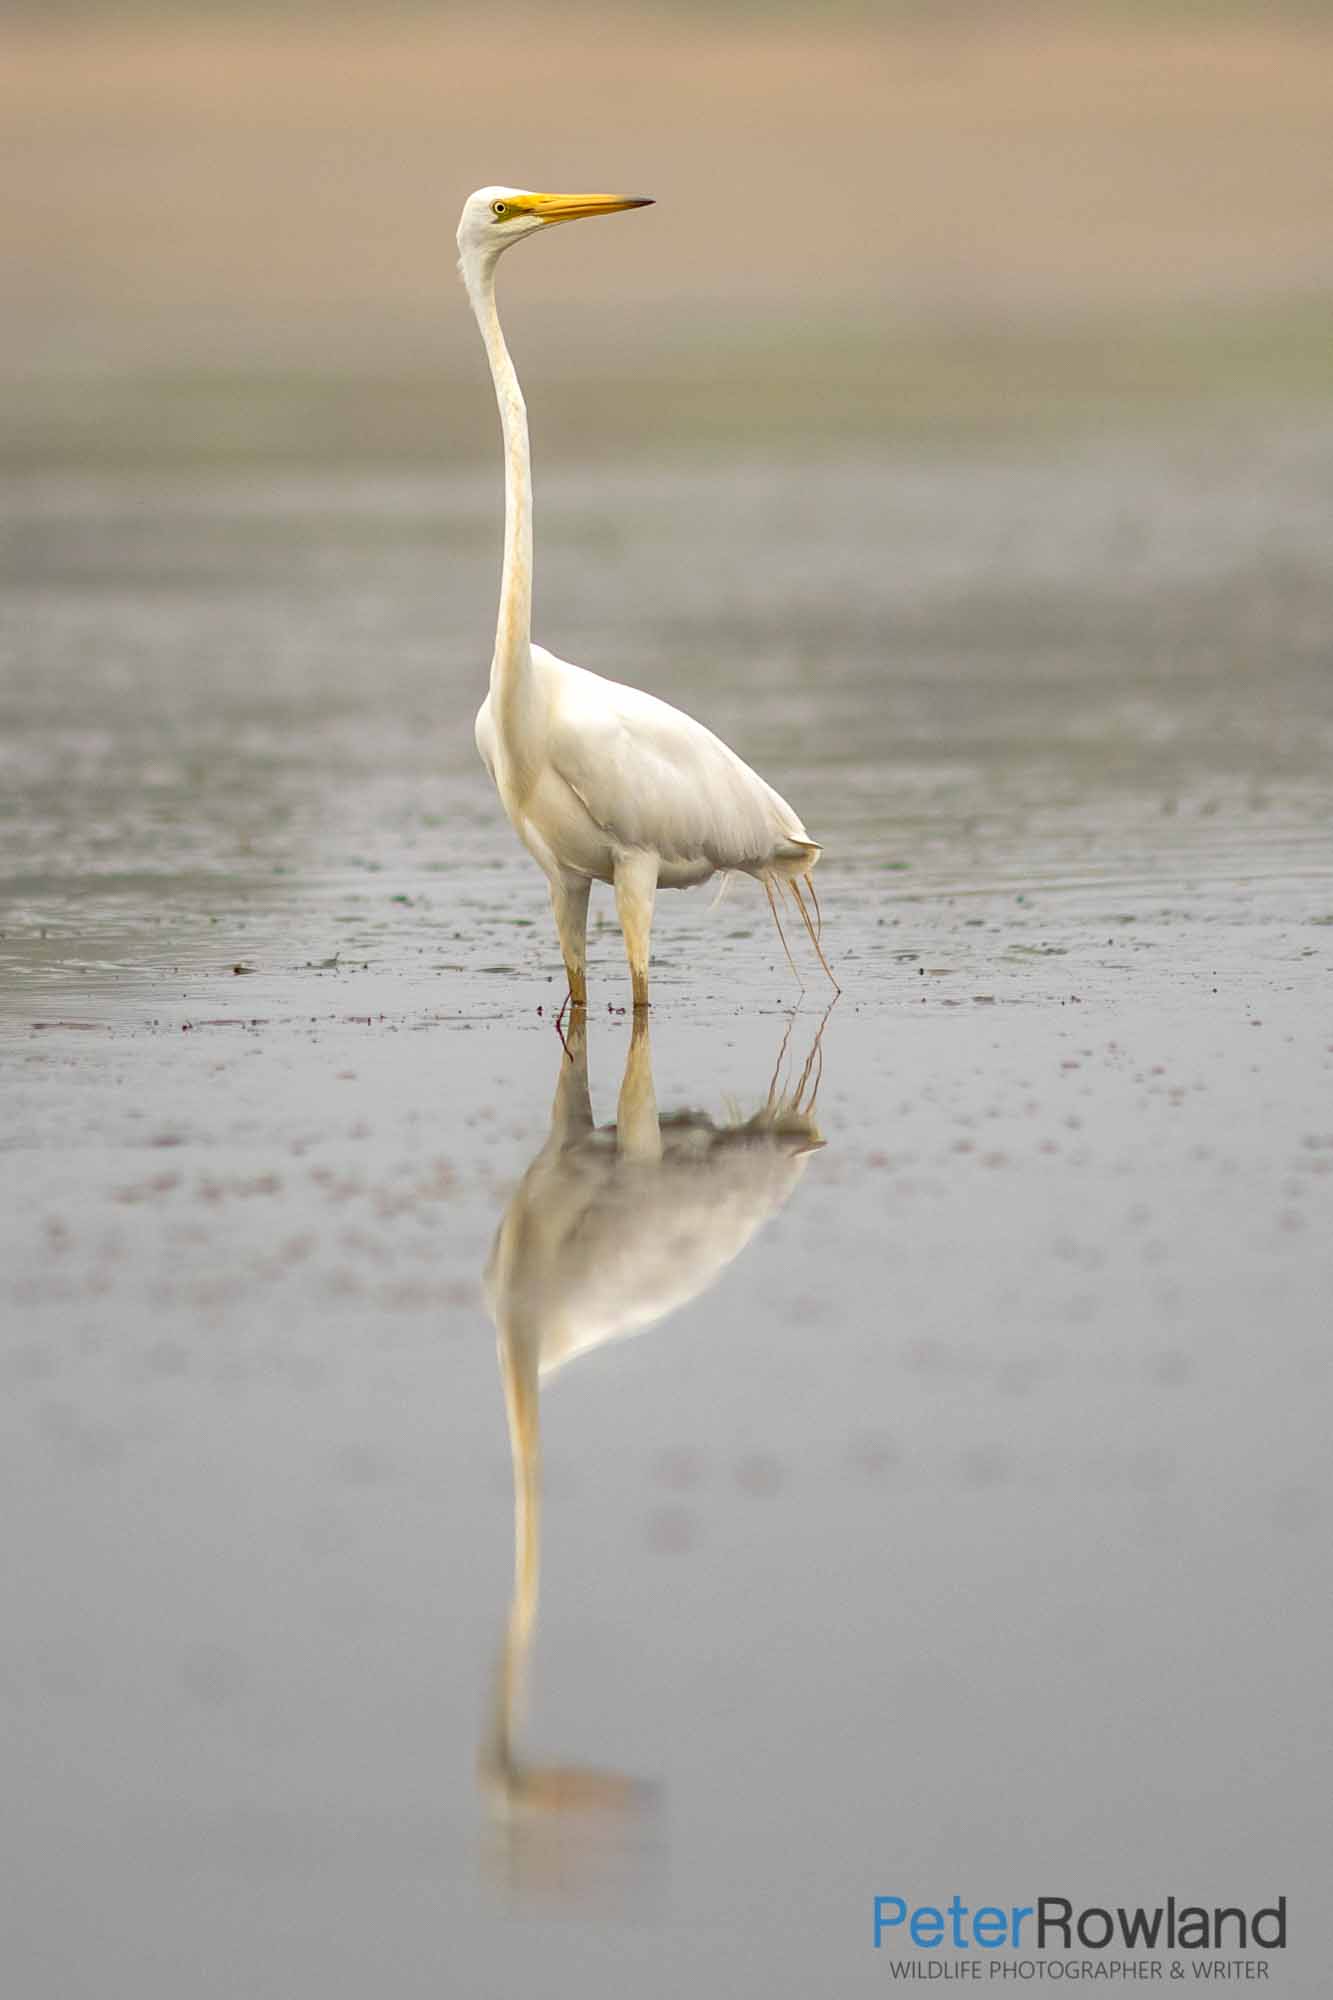 A Great Egret Wading in deep water